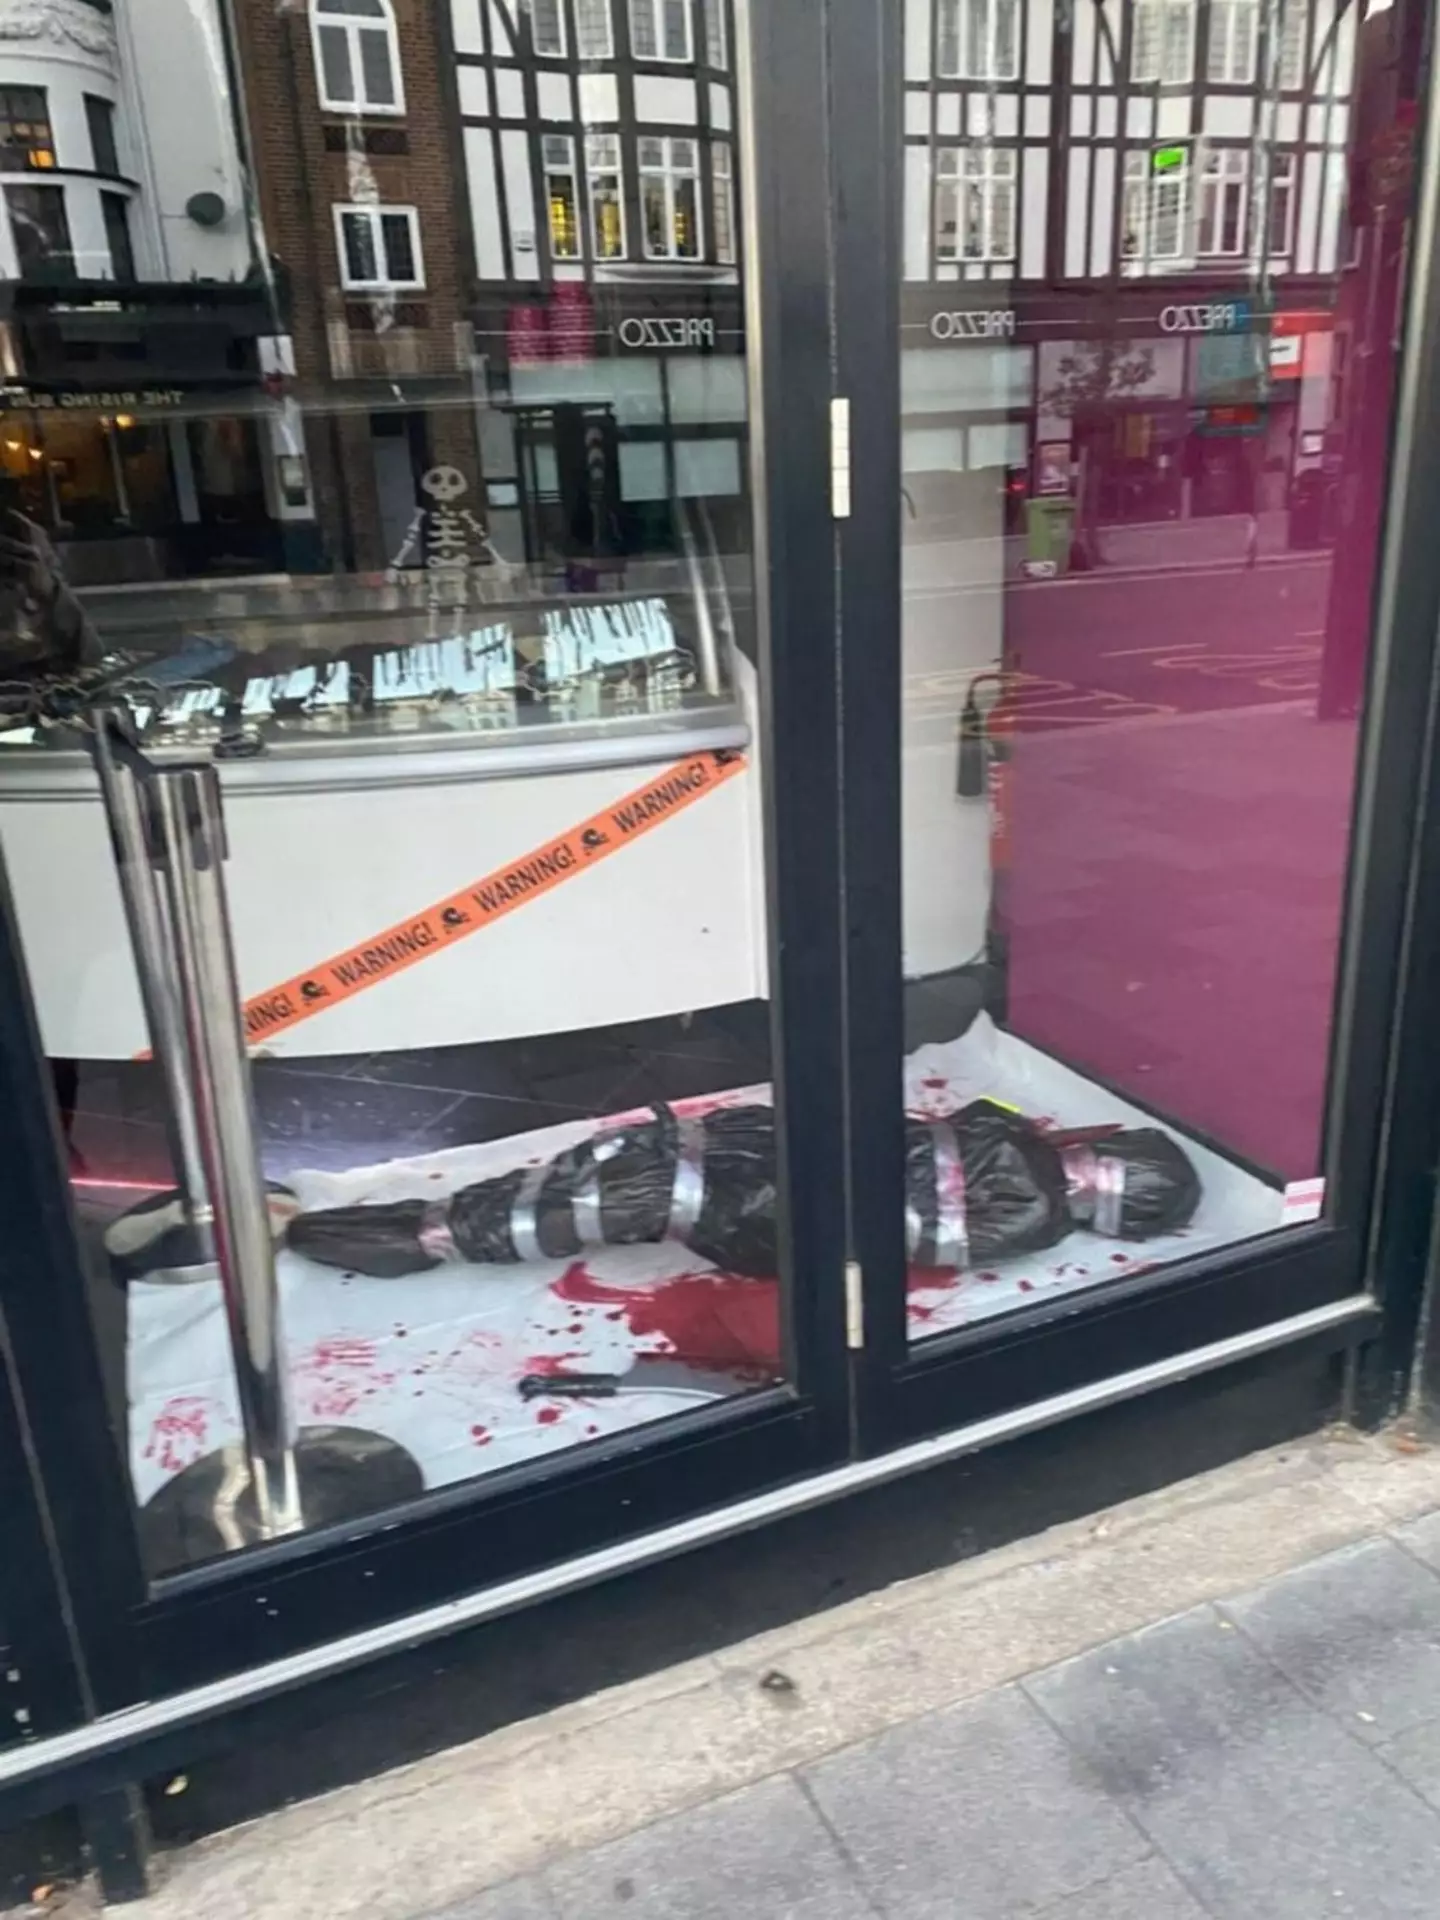 The display features crime scene tape and a fake dead body wrapped up in a bin bag and tape.